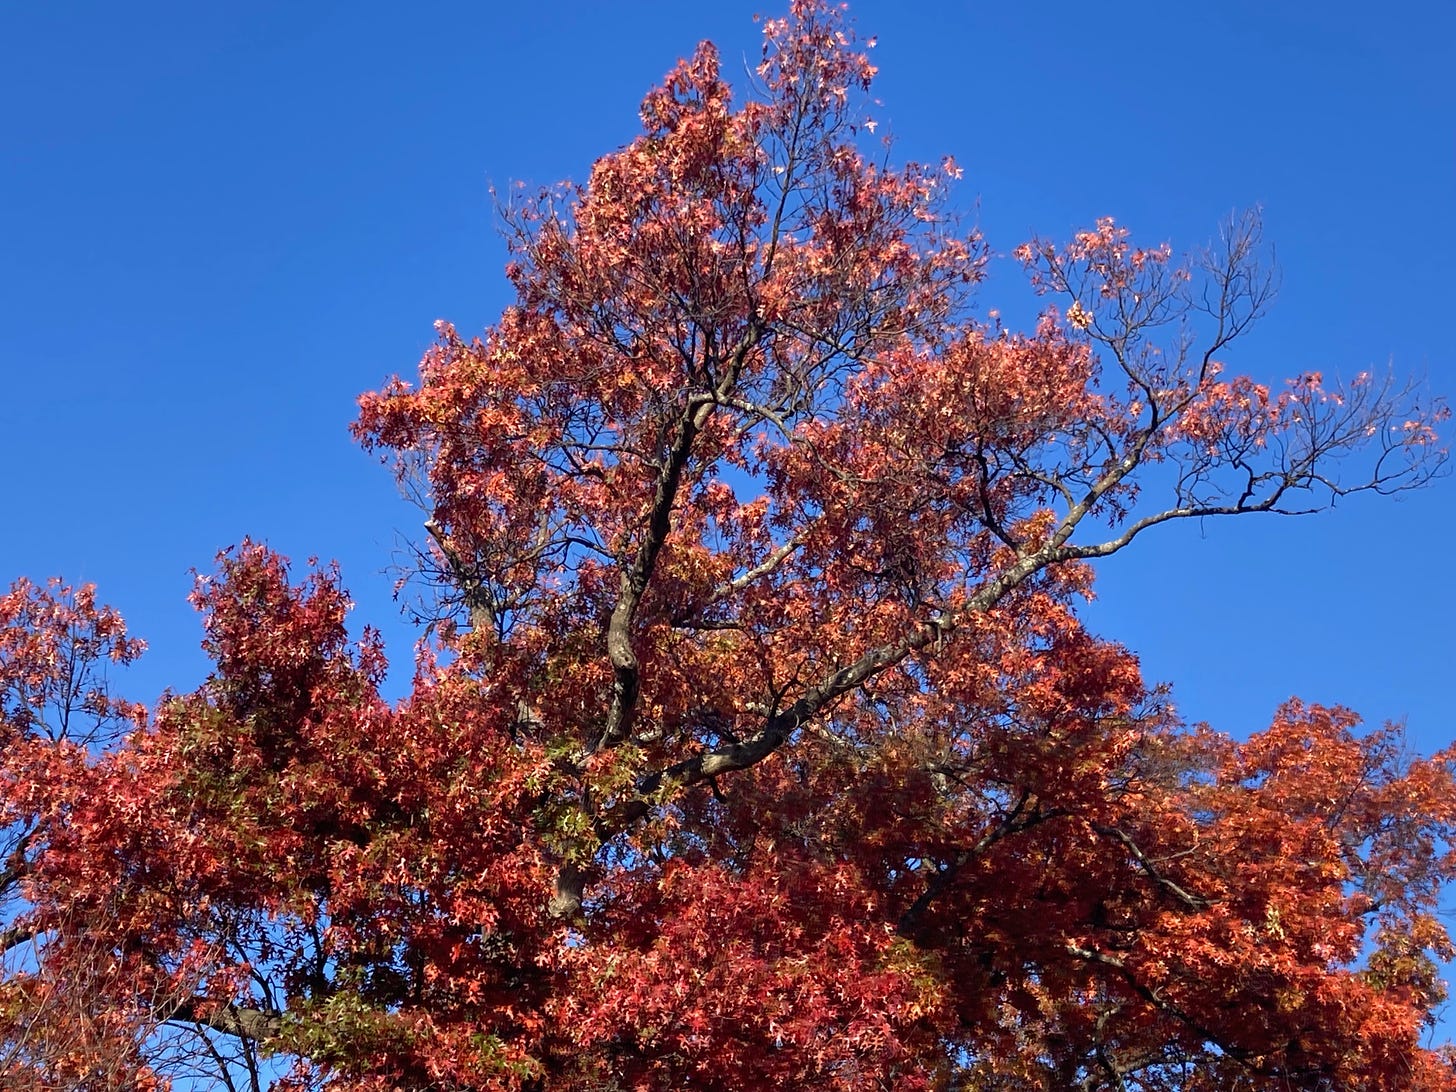 An oak tree with bright red leaves against a blue sky